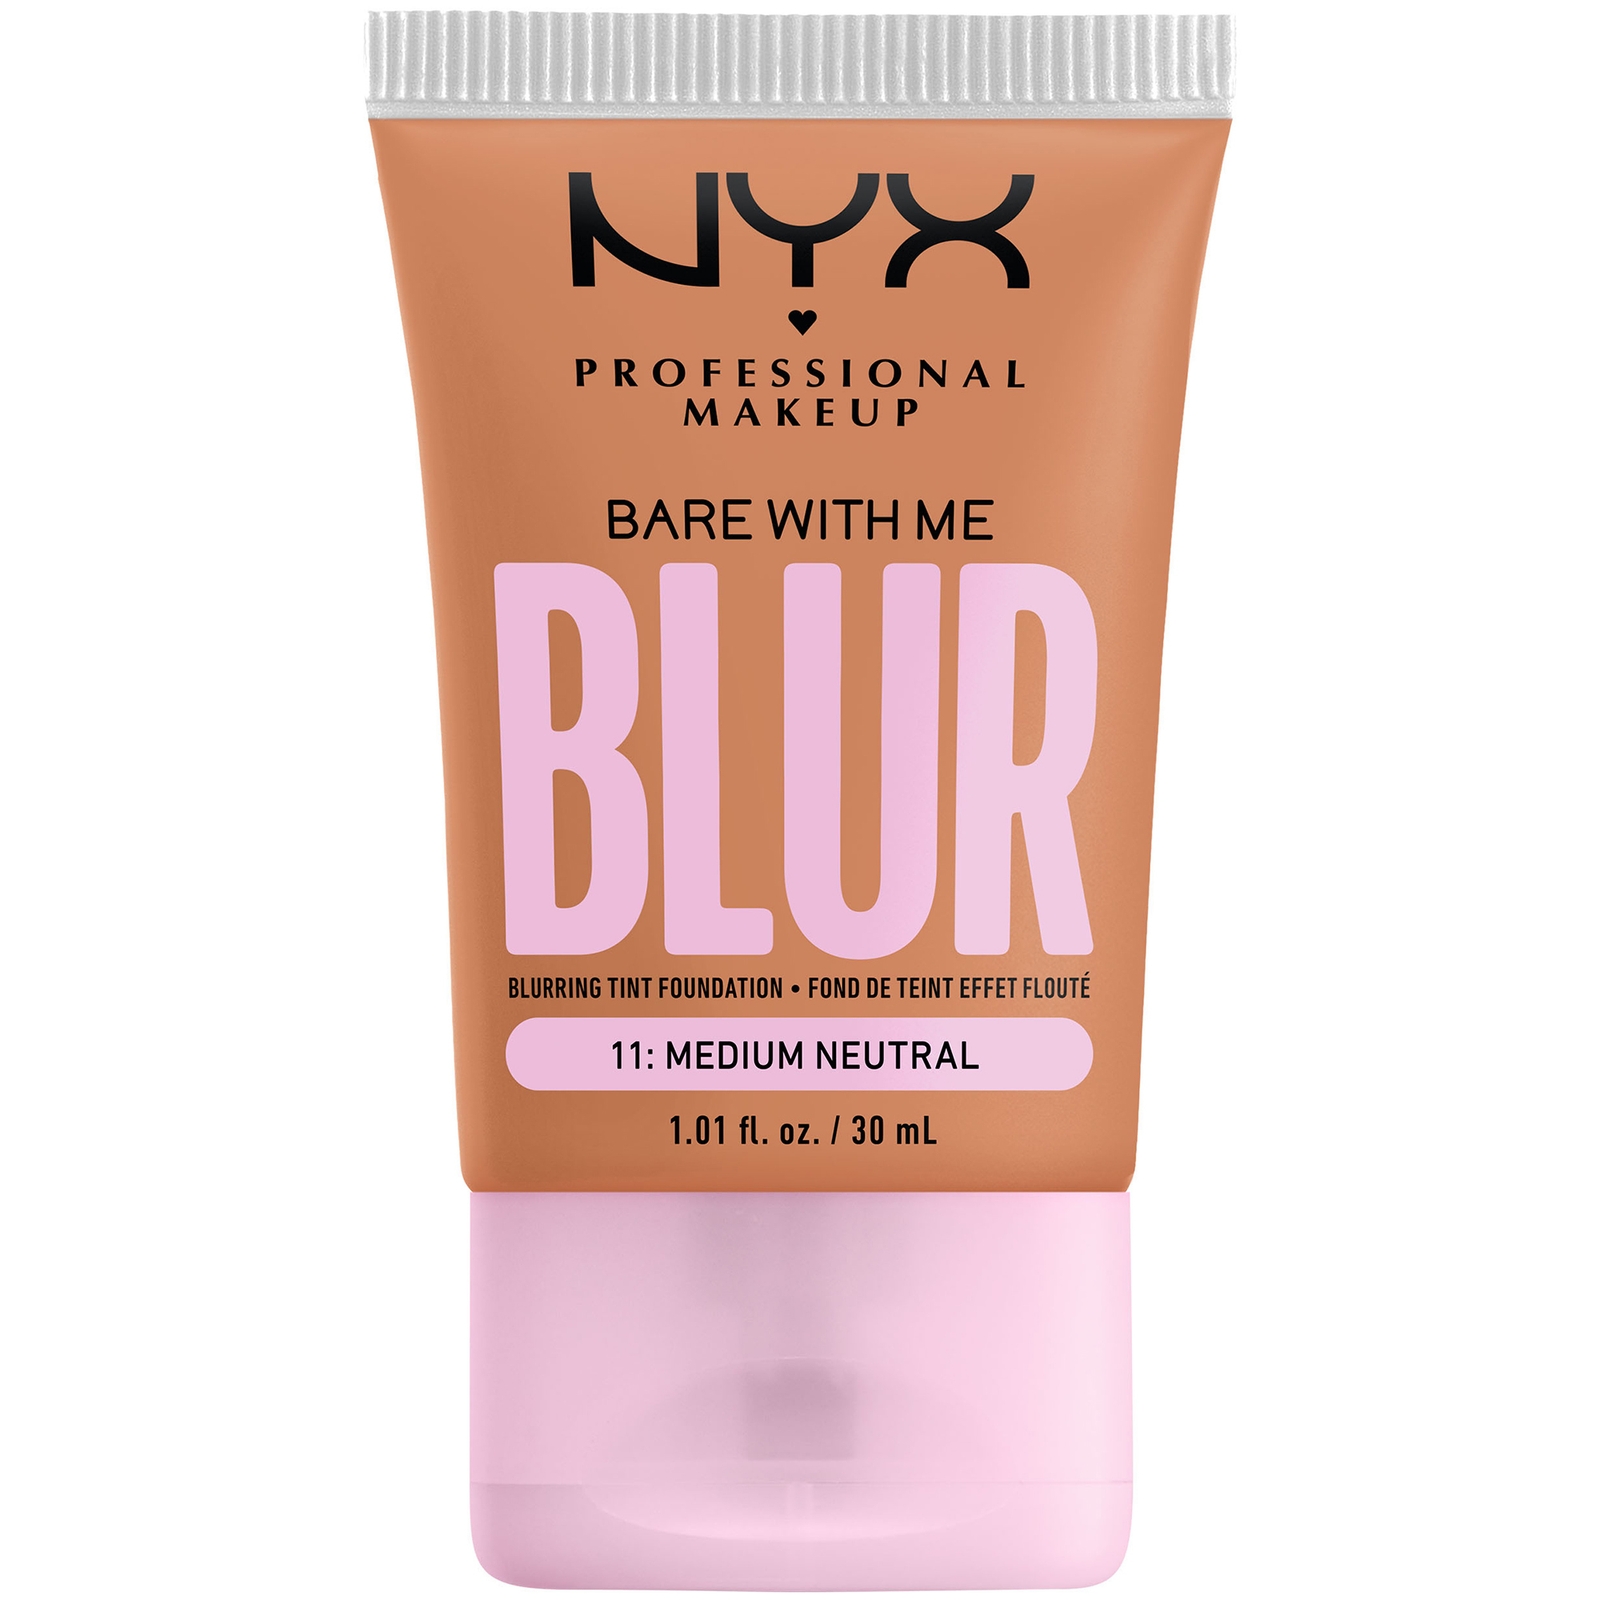 Nyx Professional Makeup Bare With Me Blur Tint Foundation 30ml (varios Shades) - Medium Neutral In White